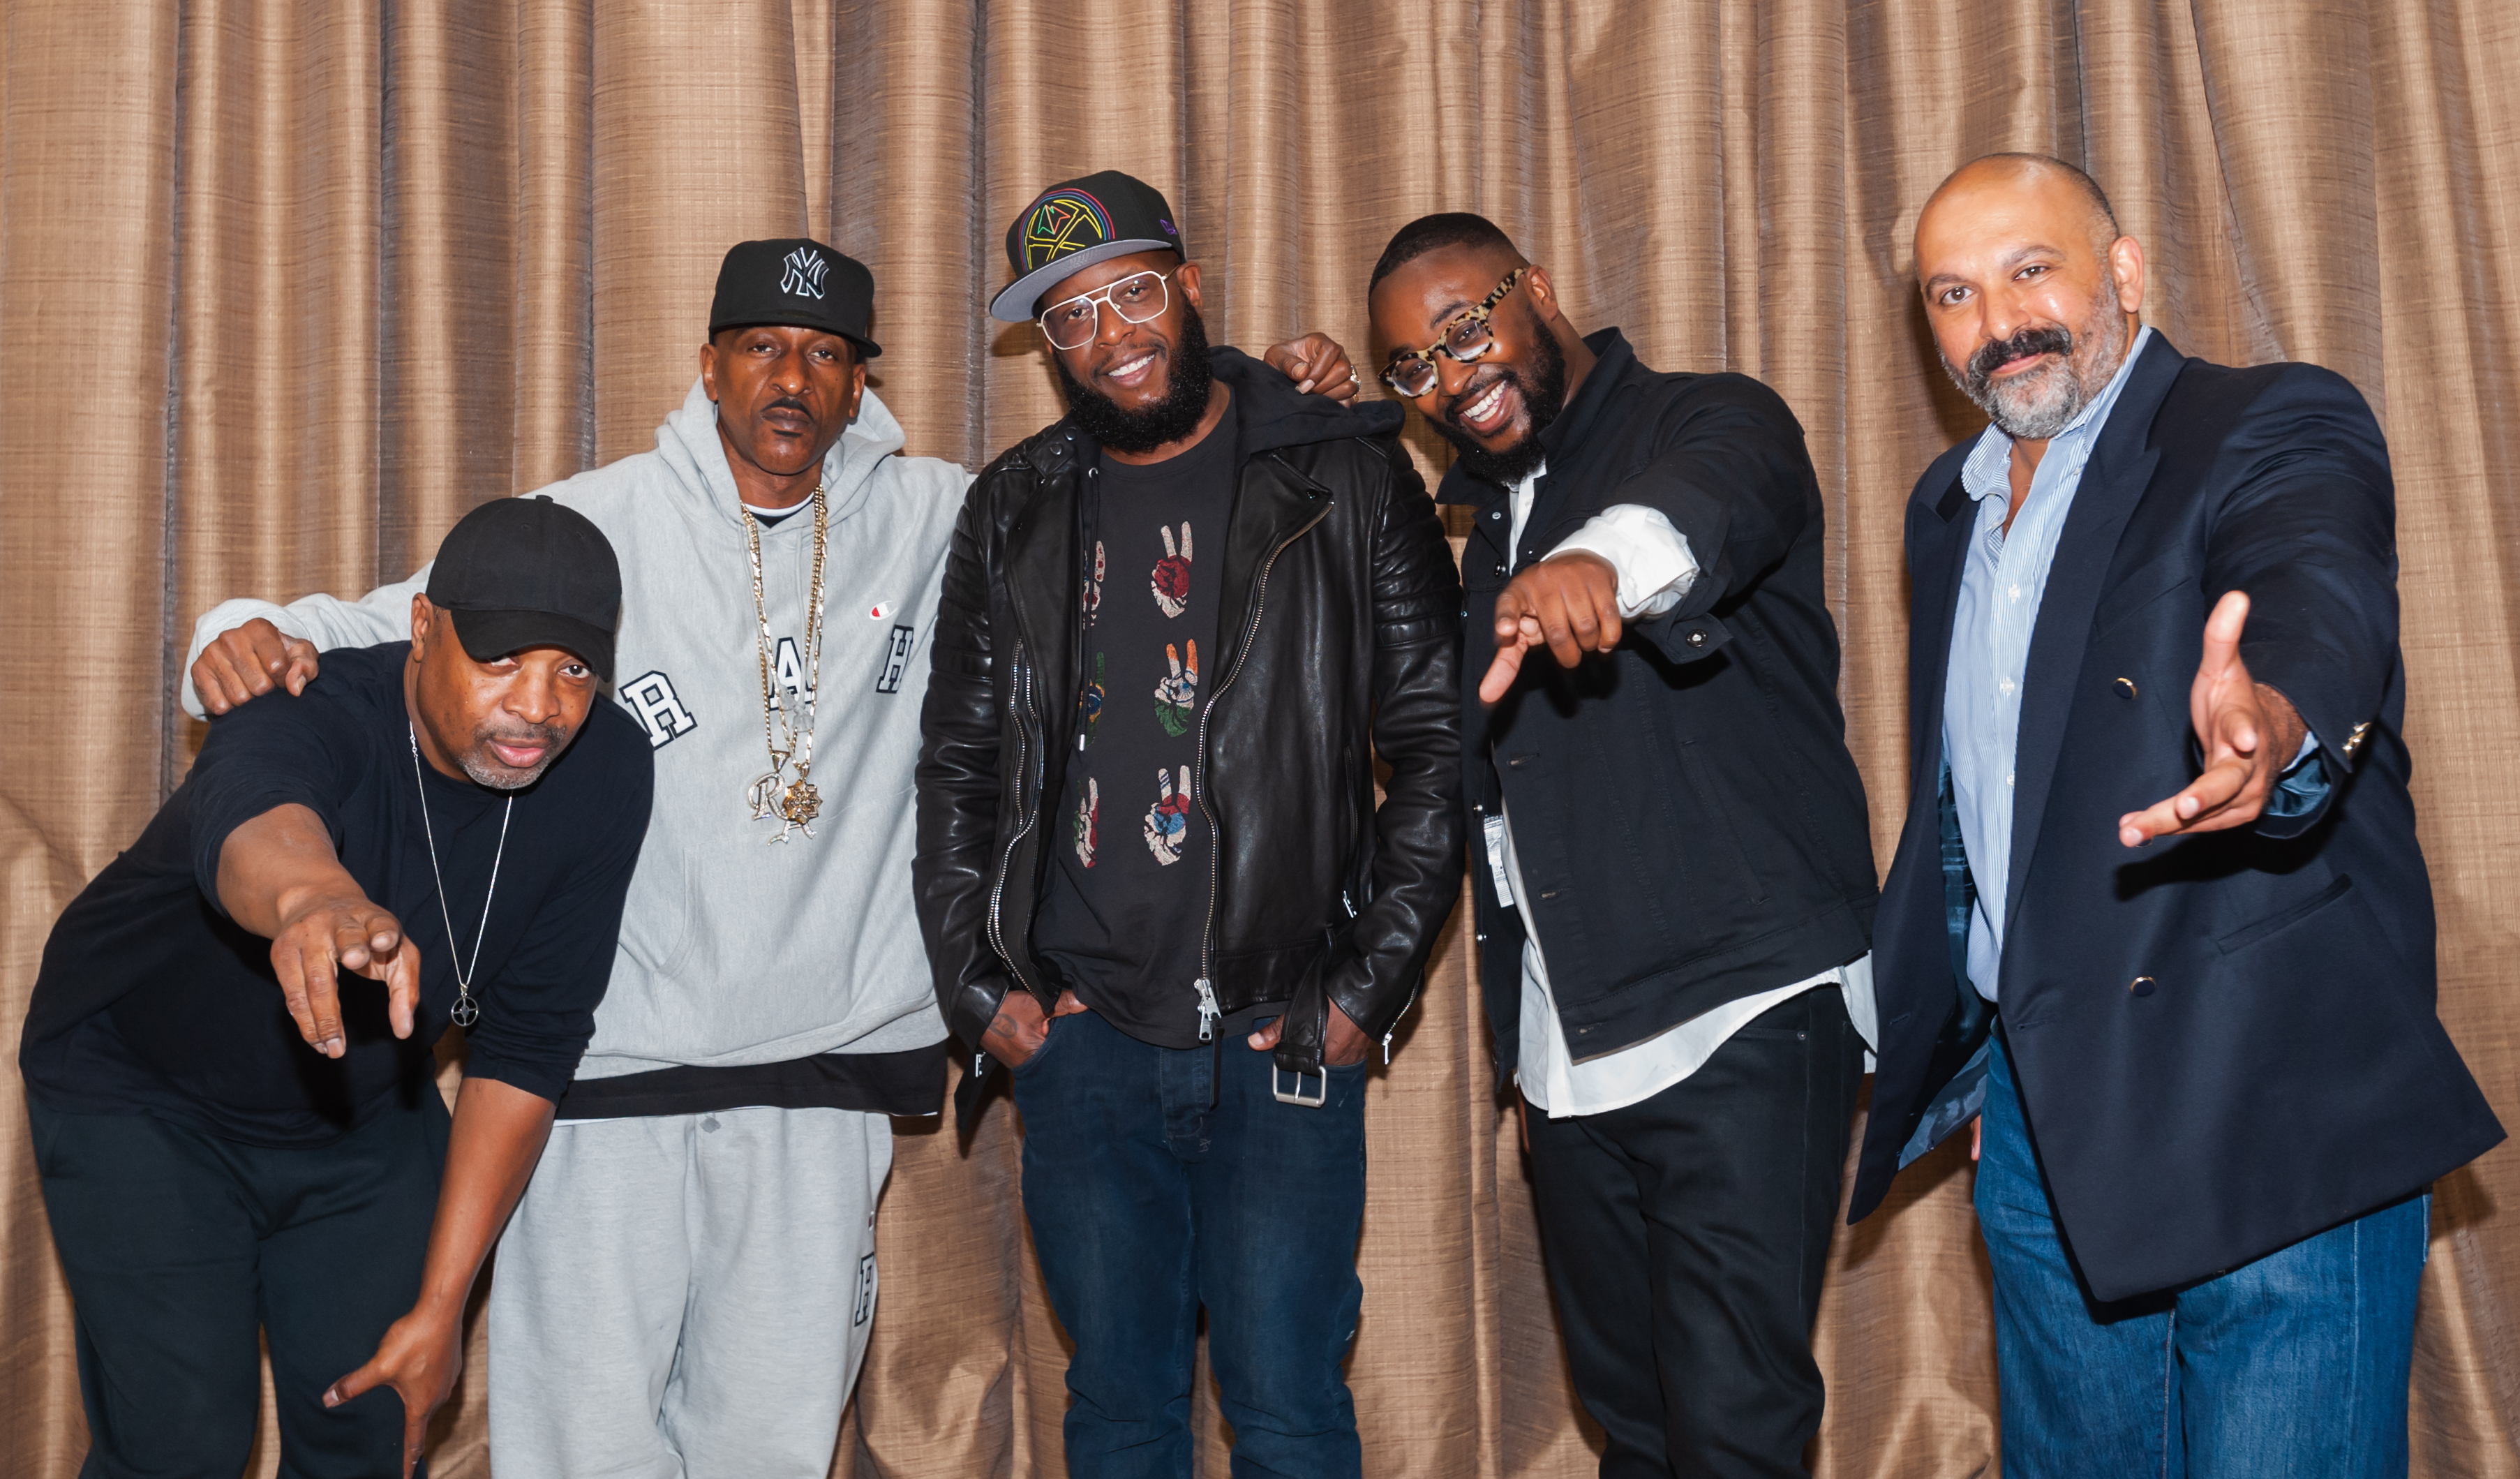 Image of Hip-hop legends Chuck D, Rakim and Talib Kweli, curator and journalist Tyree Boyd-Pates, and UCLA’s H. Samy Alim at an event at the California African American Museum co-sponsored by the Hip Hop Studies Working Group at UCLA.